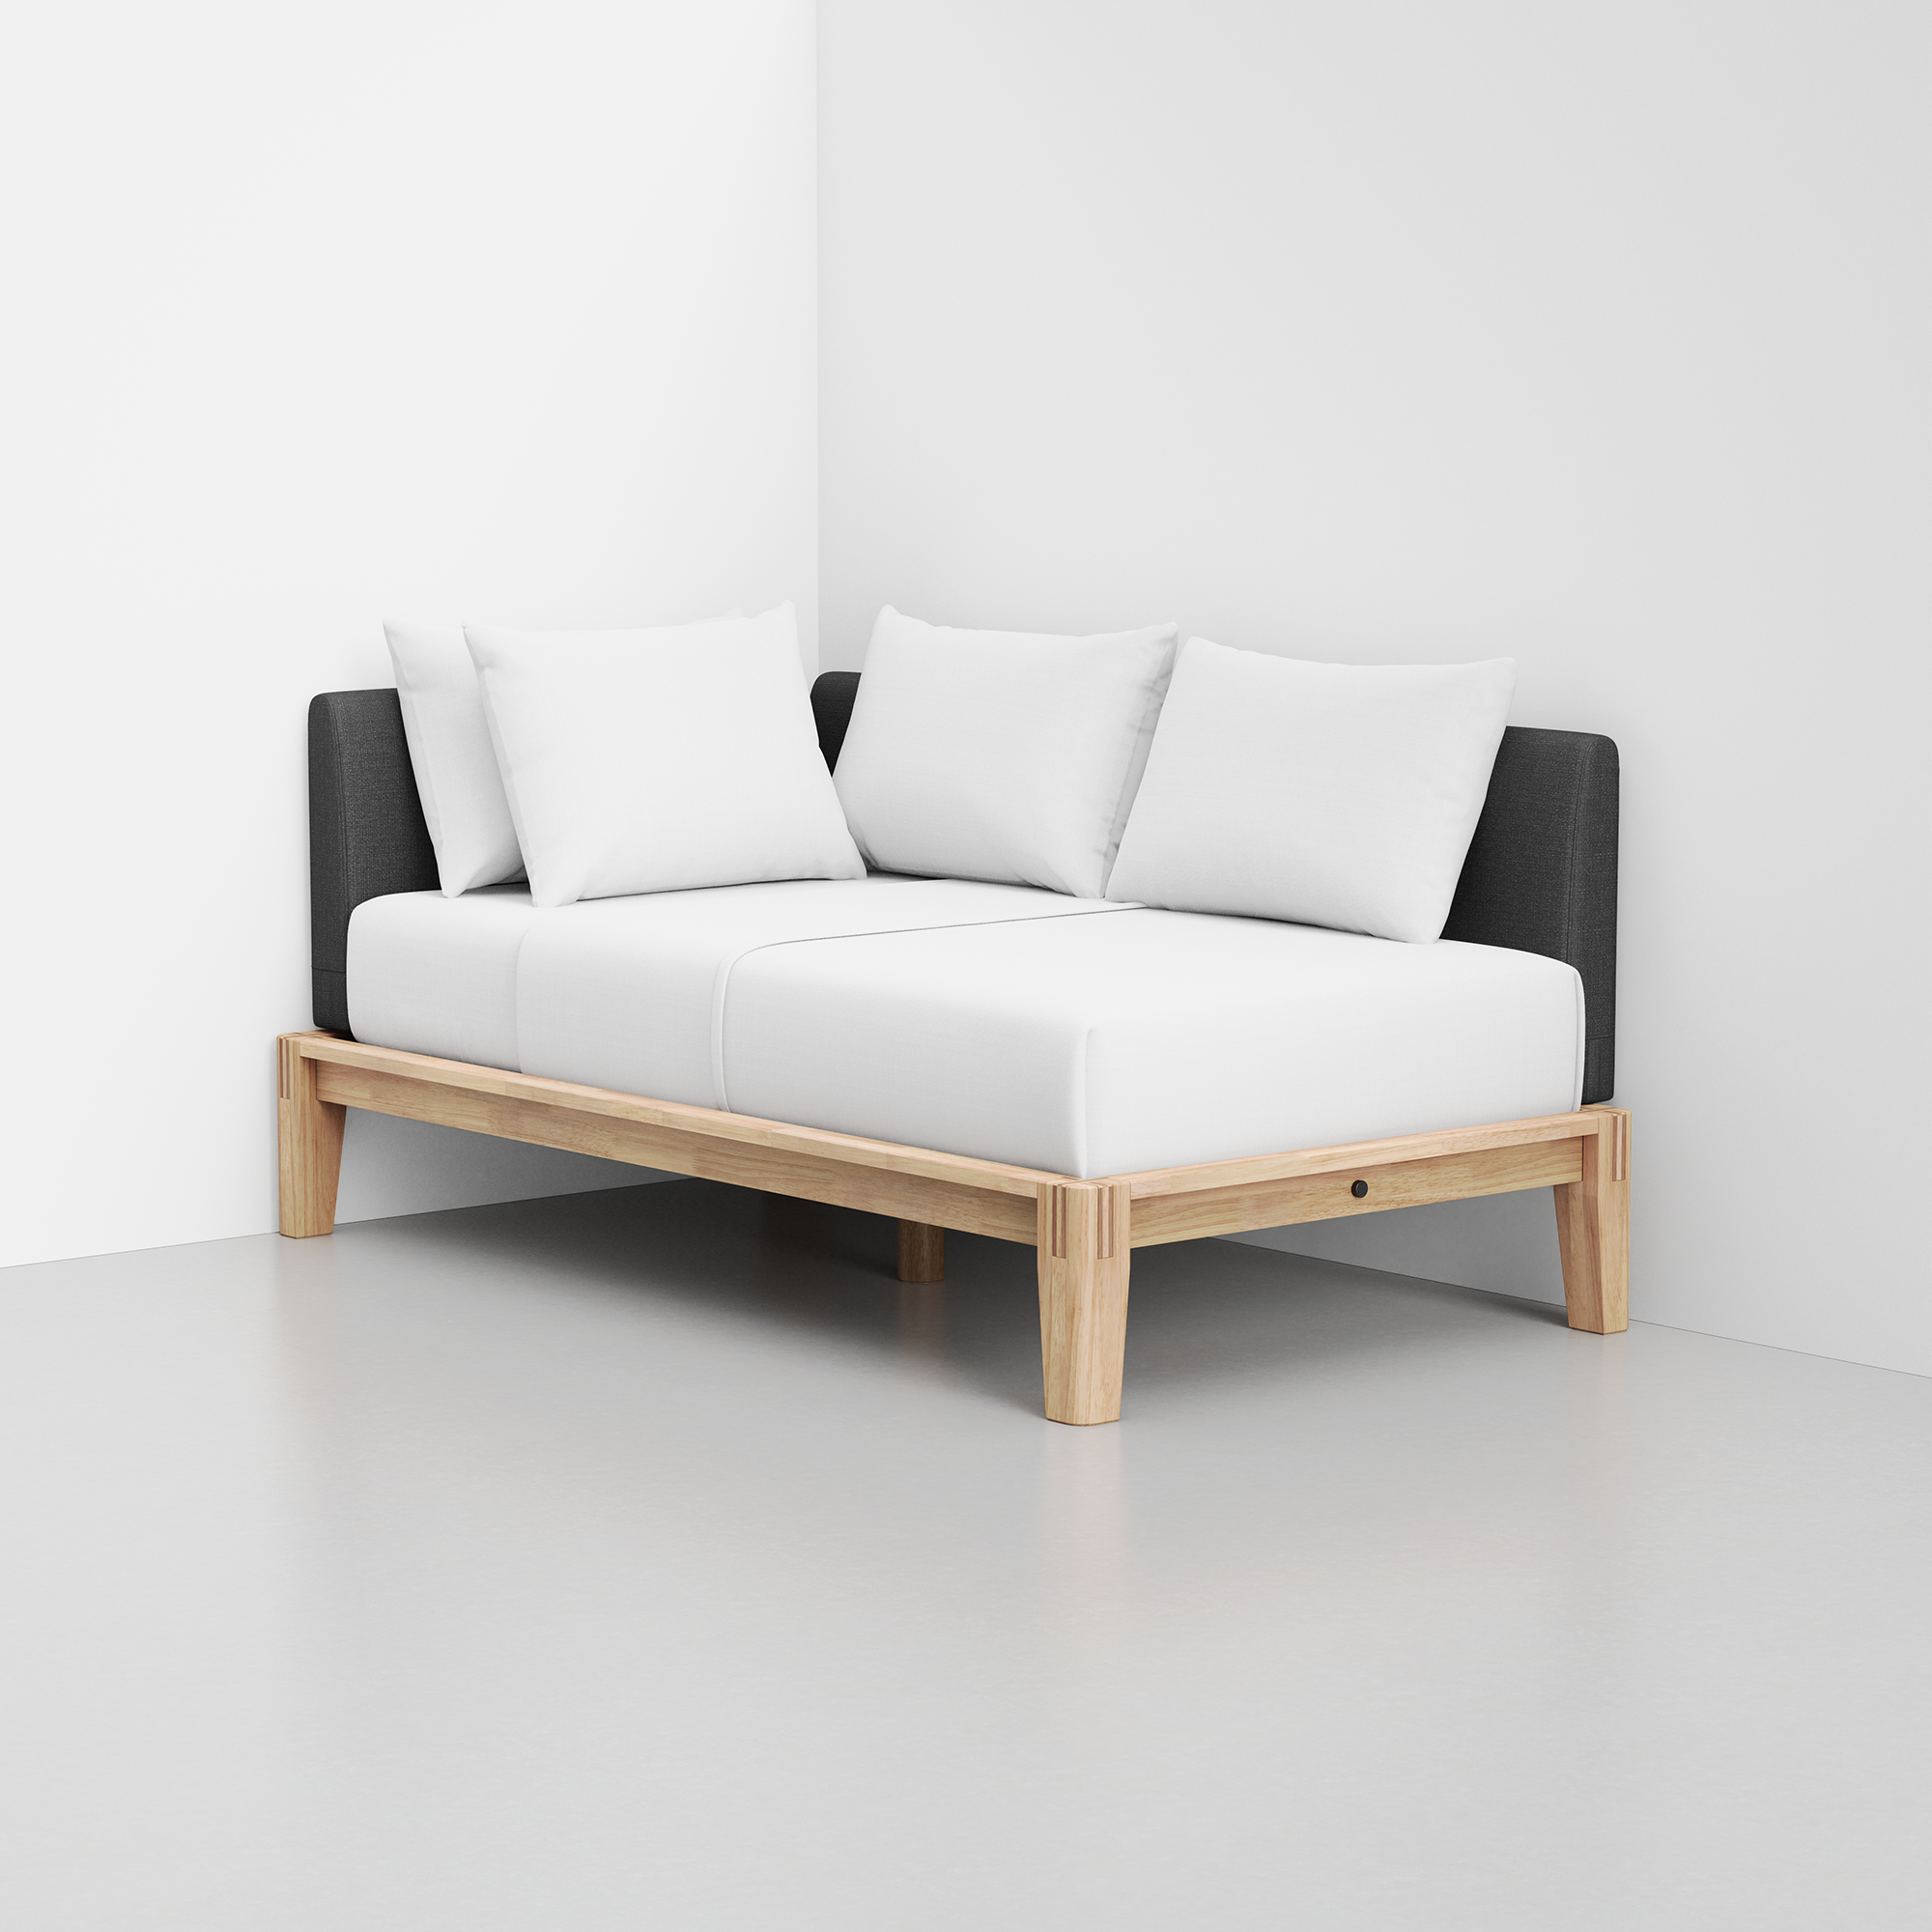 PDP Image: The Daybed (Natural / Dark Charcoal) - Rendering - Pillows